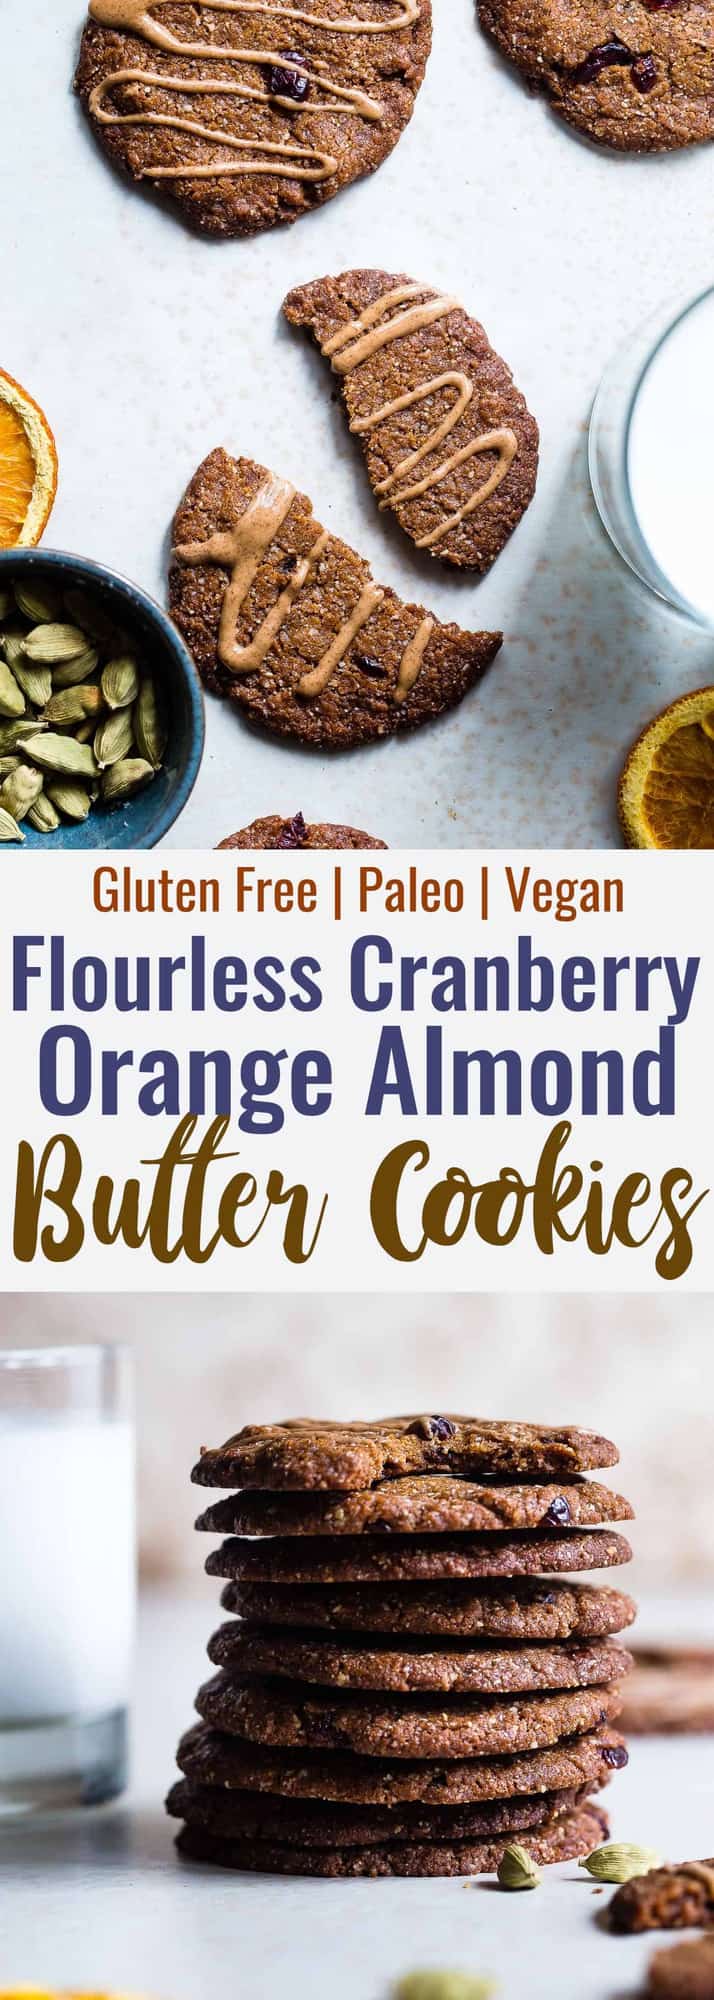 Orange Cardamom Paleo Almond Butter Cookies - SO crispy on the outside, chewy on the inside and loaded with festive flavor! You will never believe these are healthy, vegan and gluten free too! | #Foodfaithfitness | #Vegan #Glutenfree #Paleo #Almondbutter #Cookies